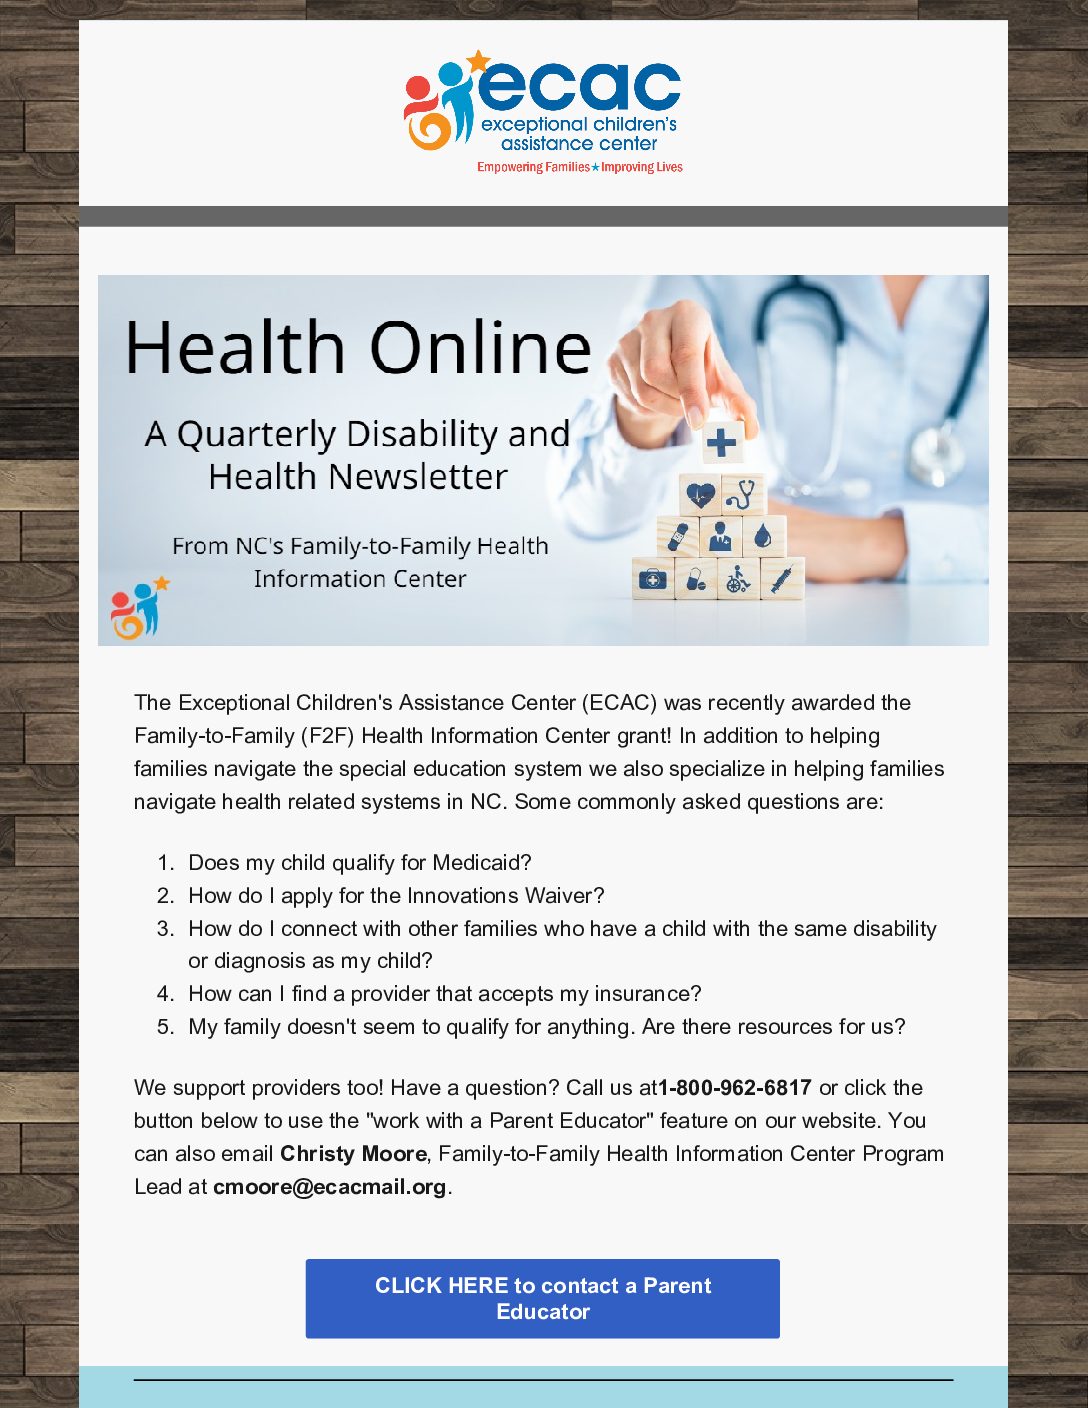 Check out “Health Online” – a new quarterly Disability and Health Newsletter